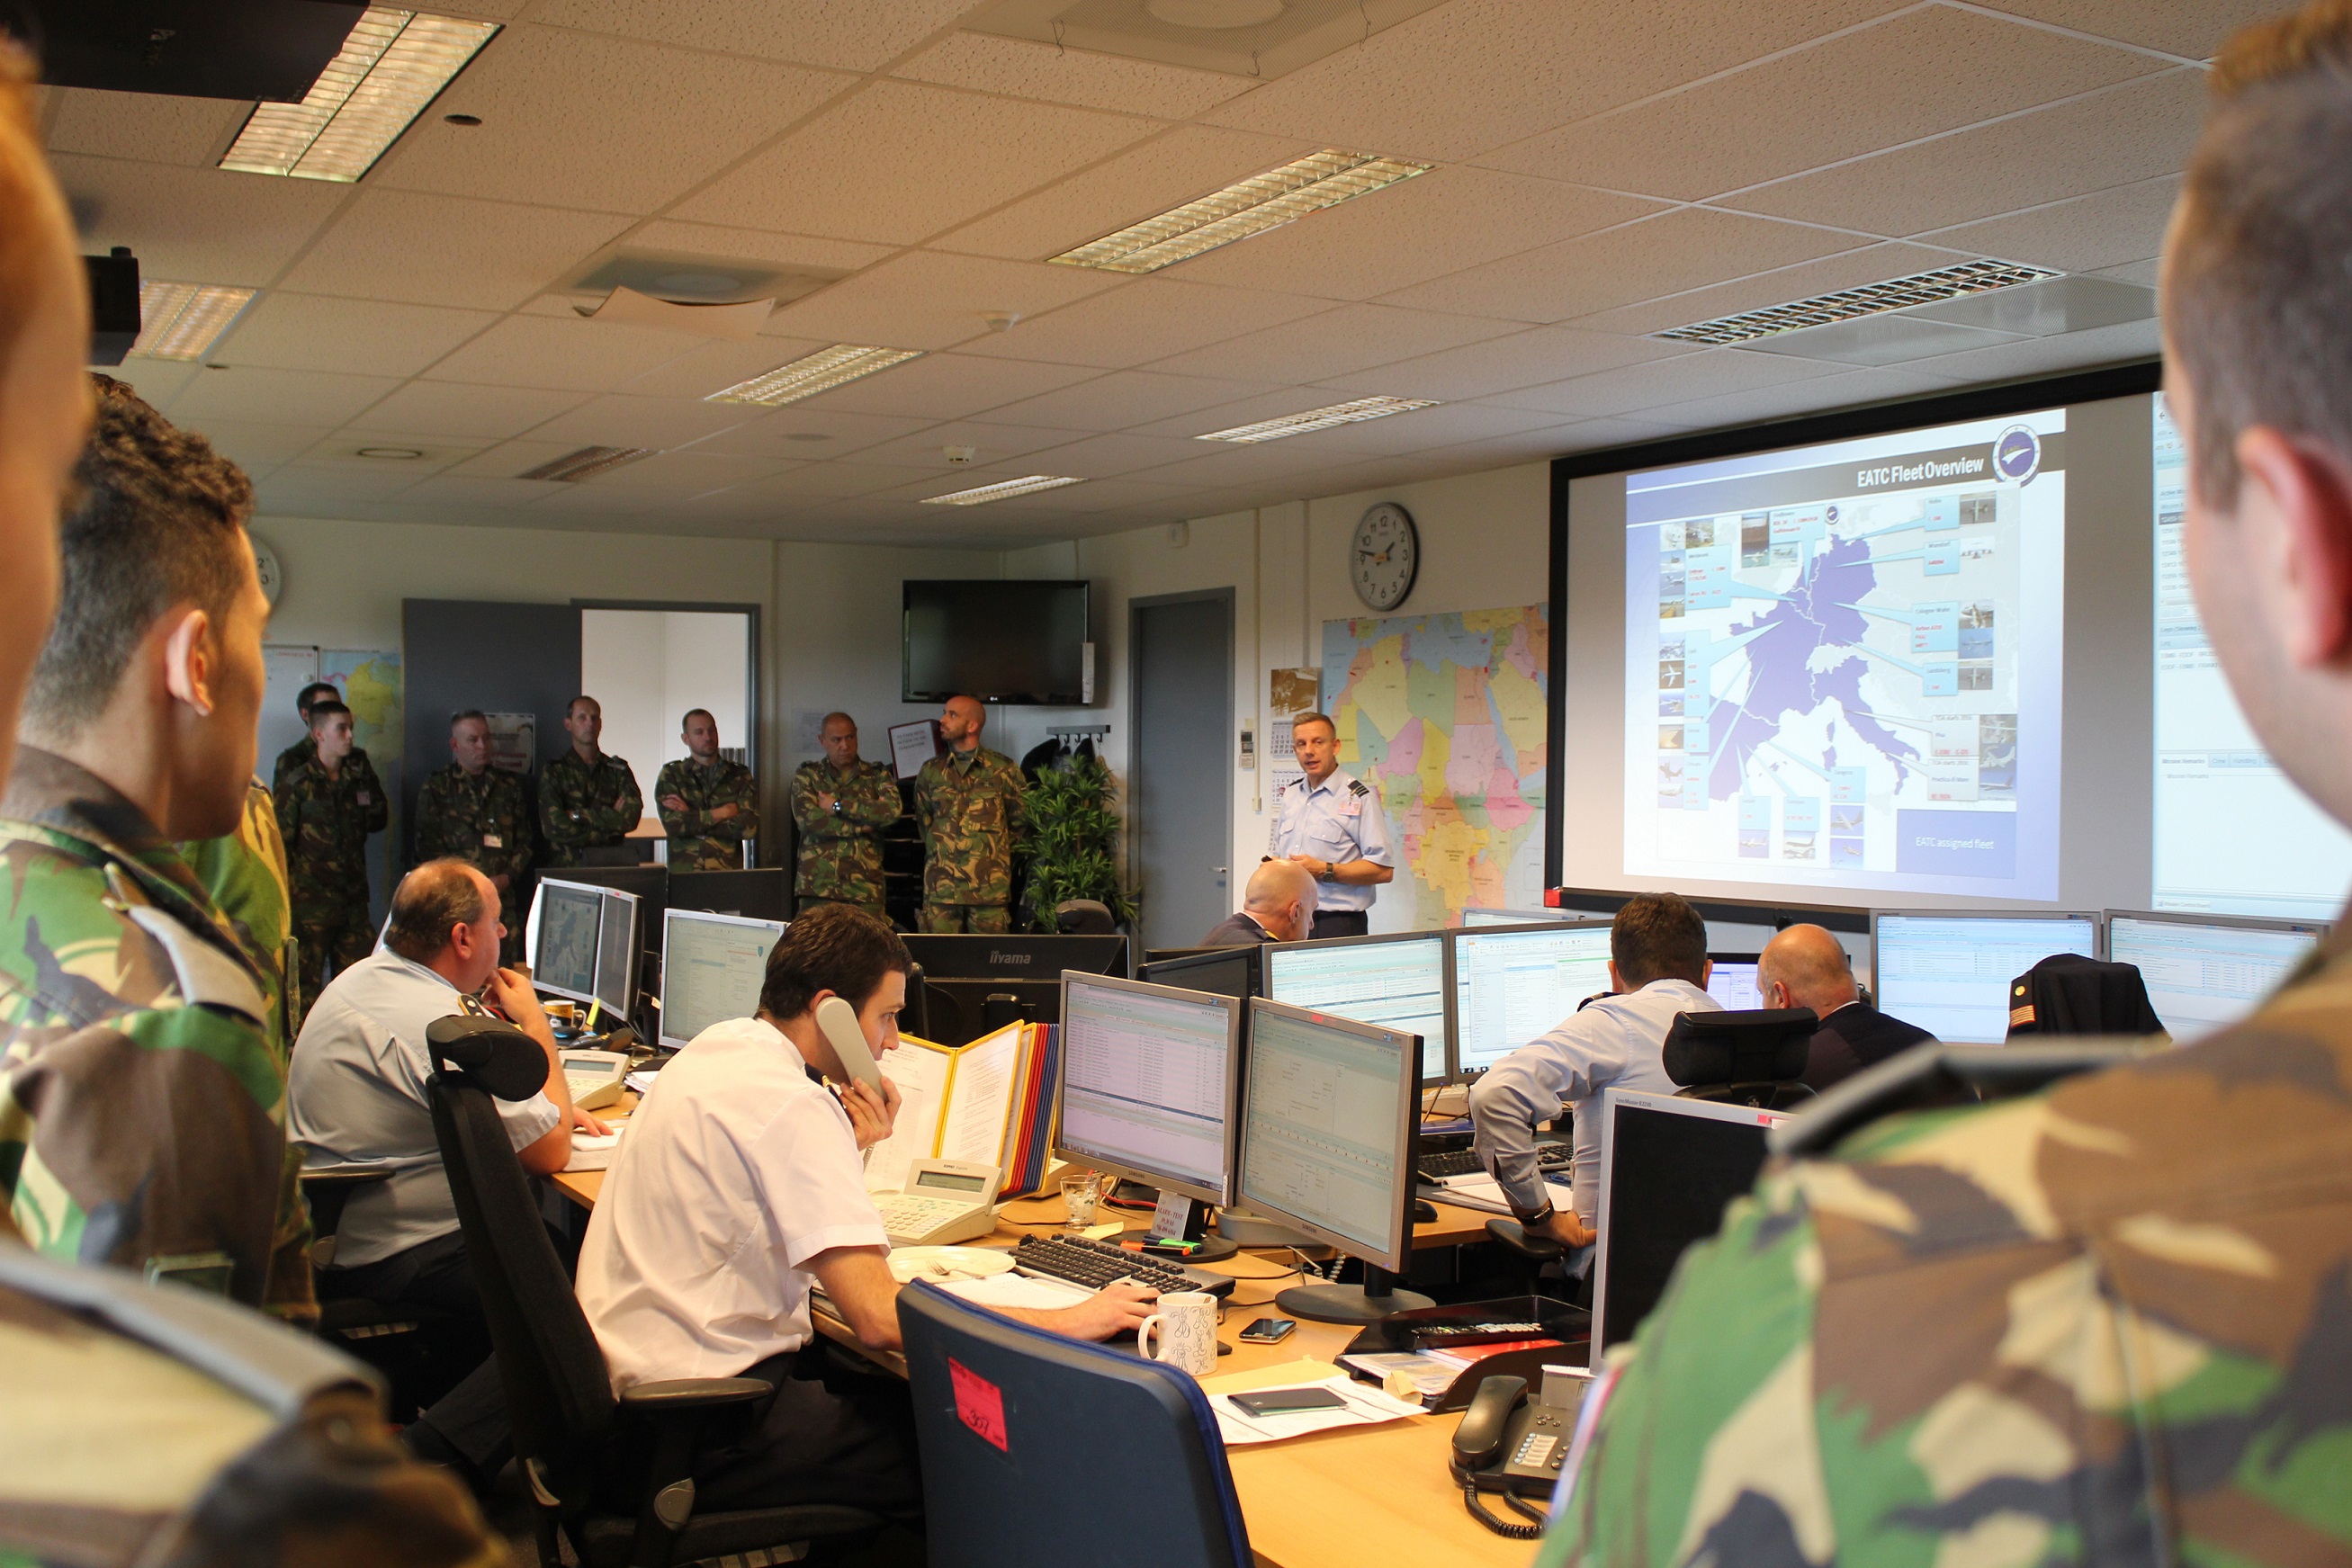 EATC INTRODUCES ITSELF TO THE DUTCH AIR CADETS FROM THE MILITARY ACADEMY